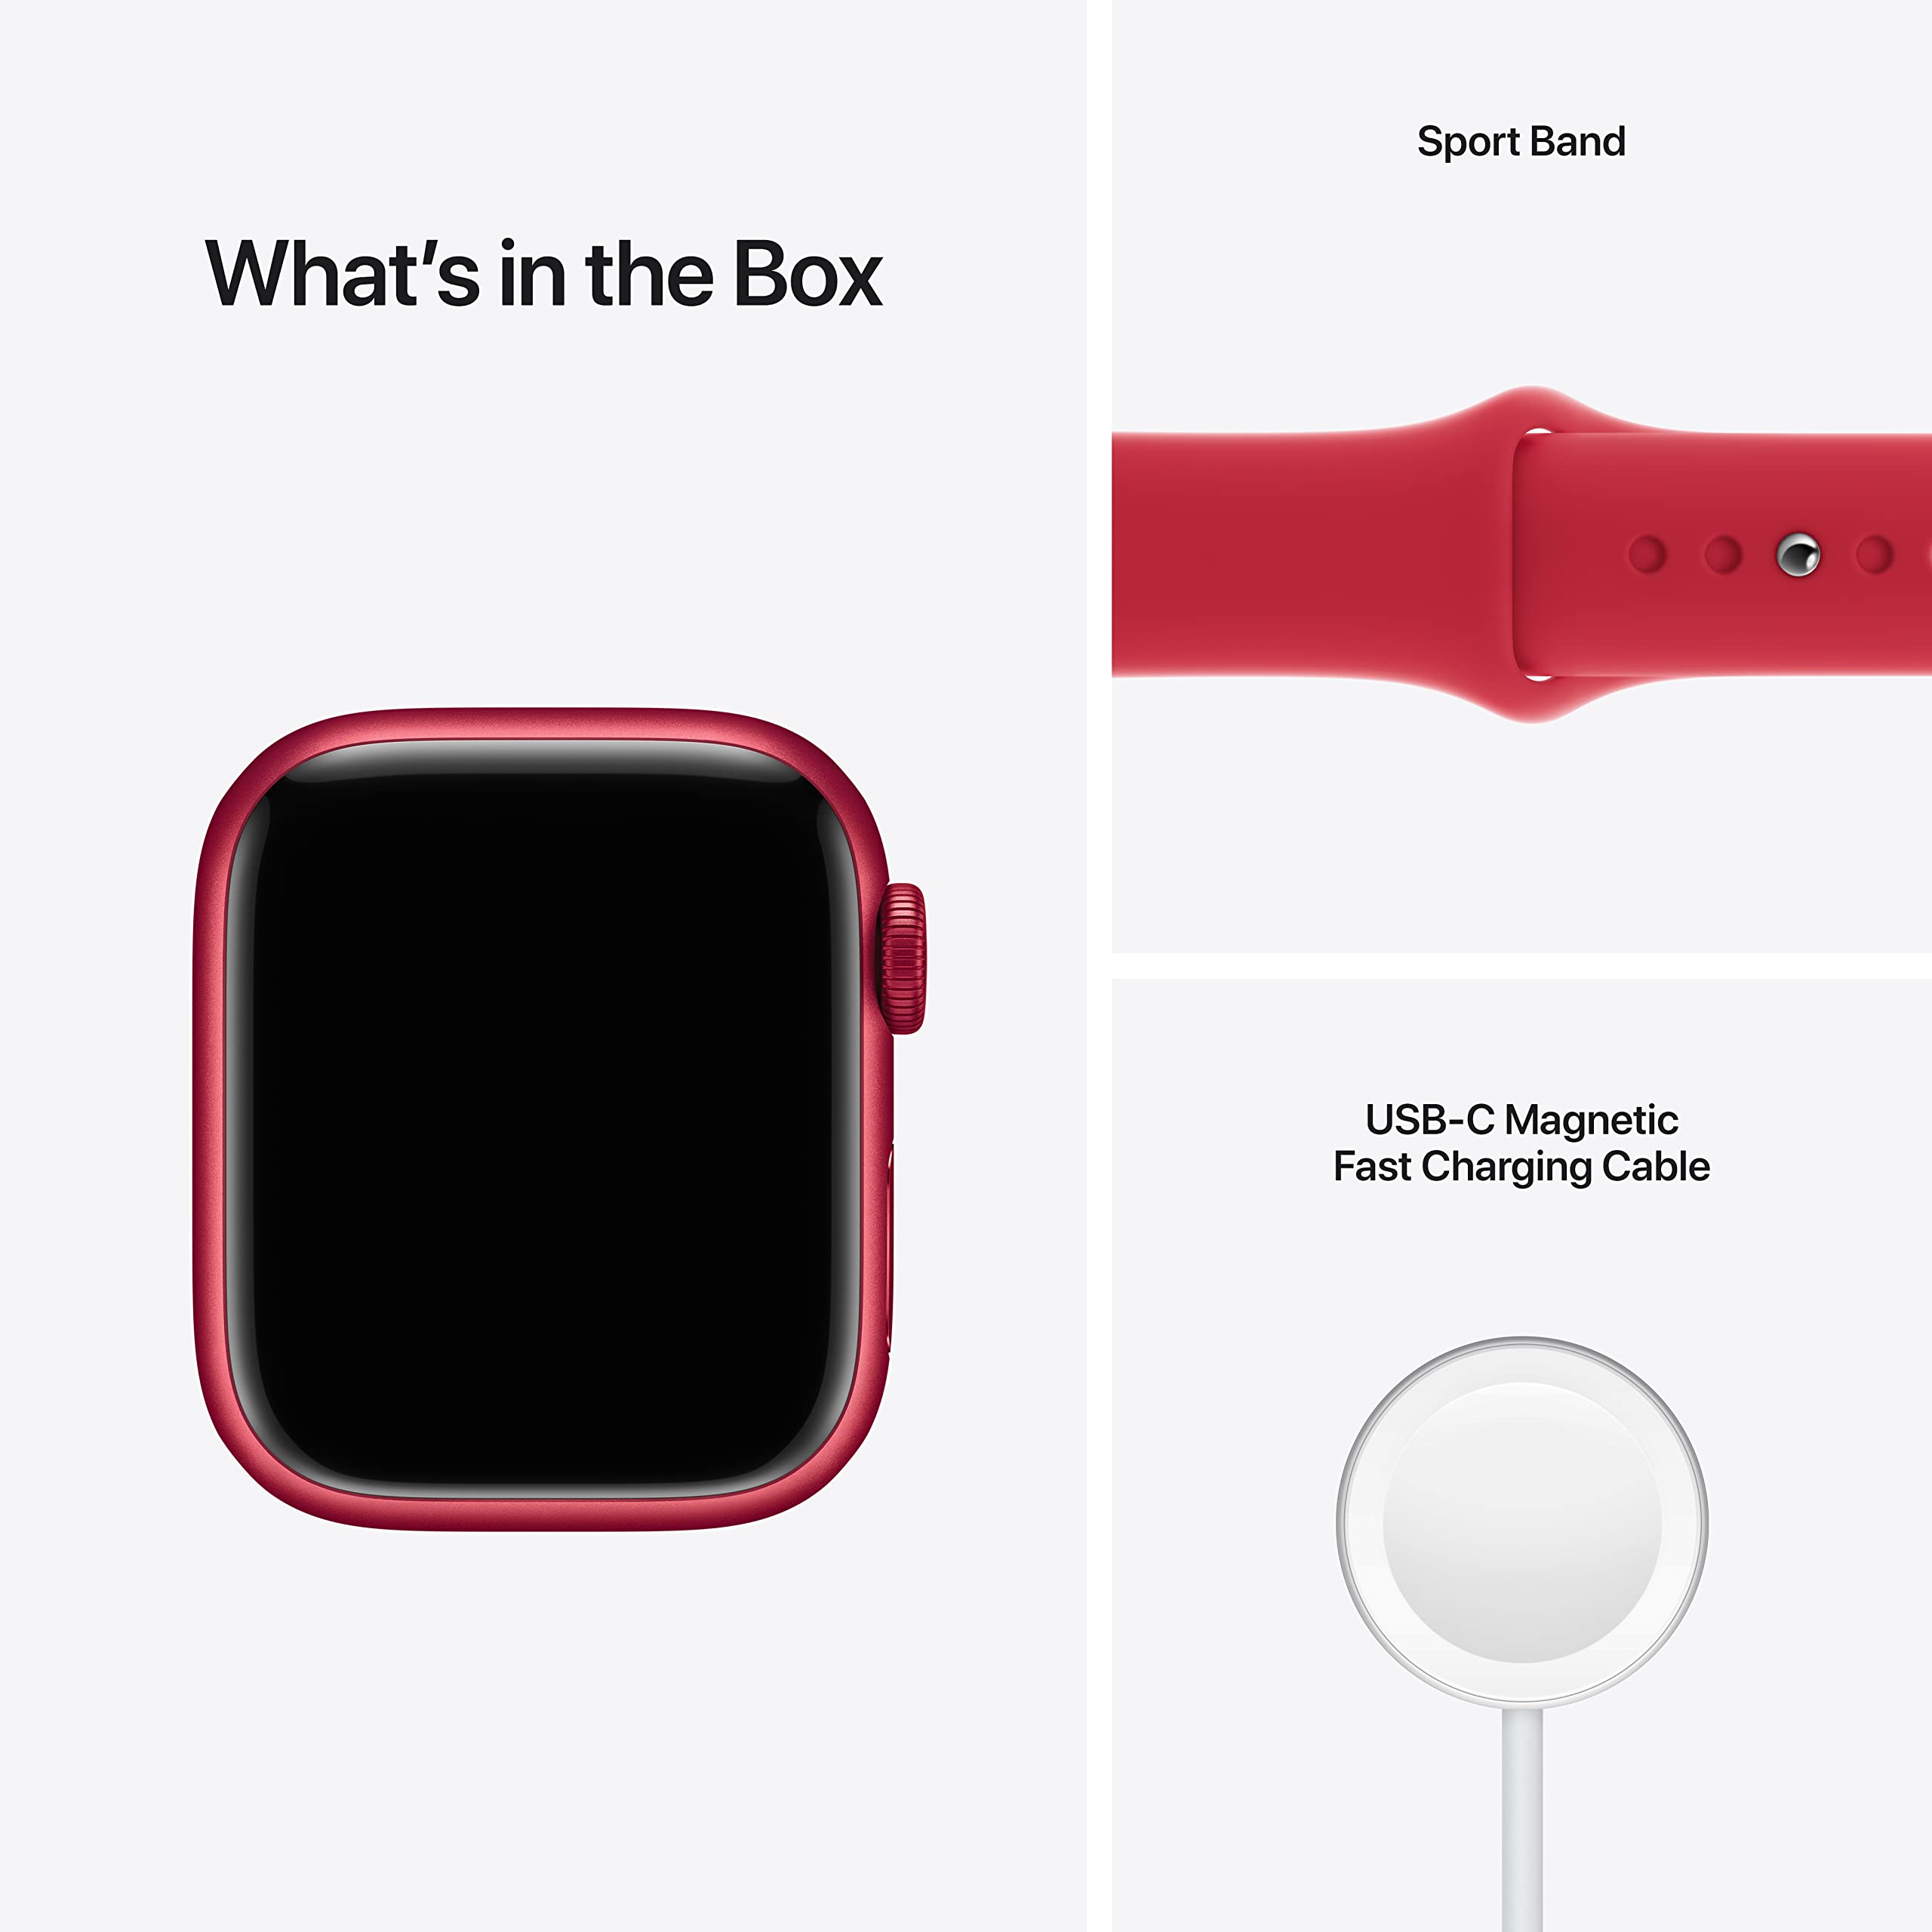 Apple Watch Series 7 [GPS 41mm] Smart Watch w/ (Product) RED Aluminum Case with (Product) RED Sport Band. Fitness Tracker, Blood Oxygen & ECG Apps, Always-On Retina Display, Water Resistant